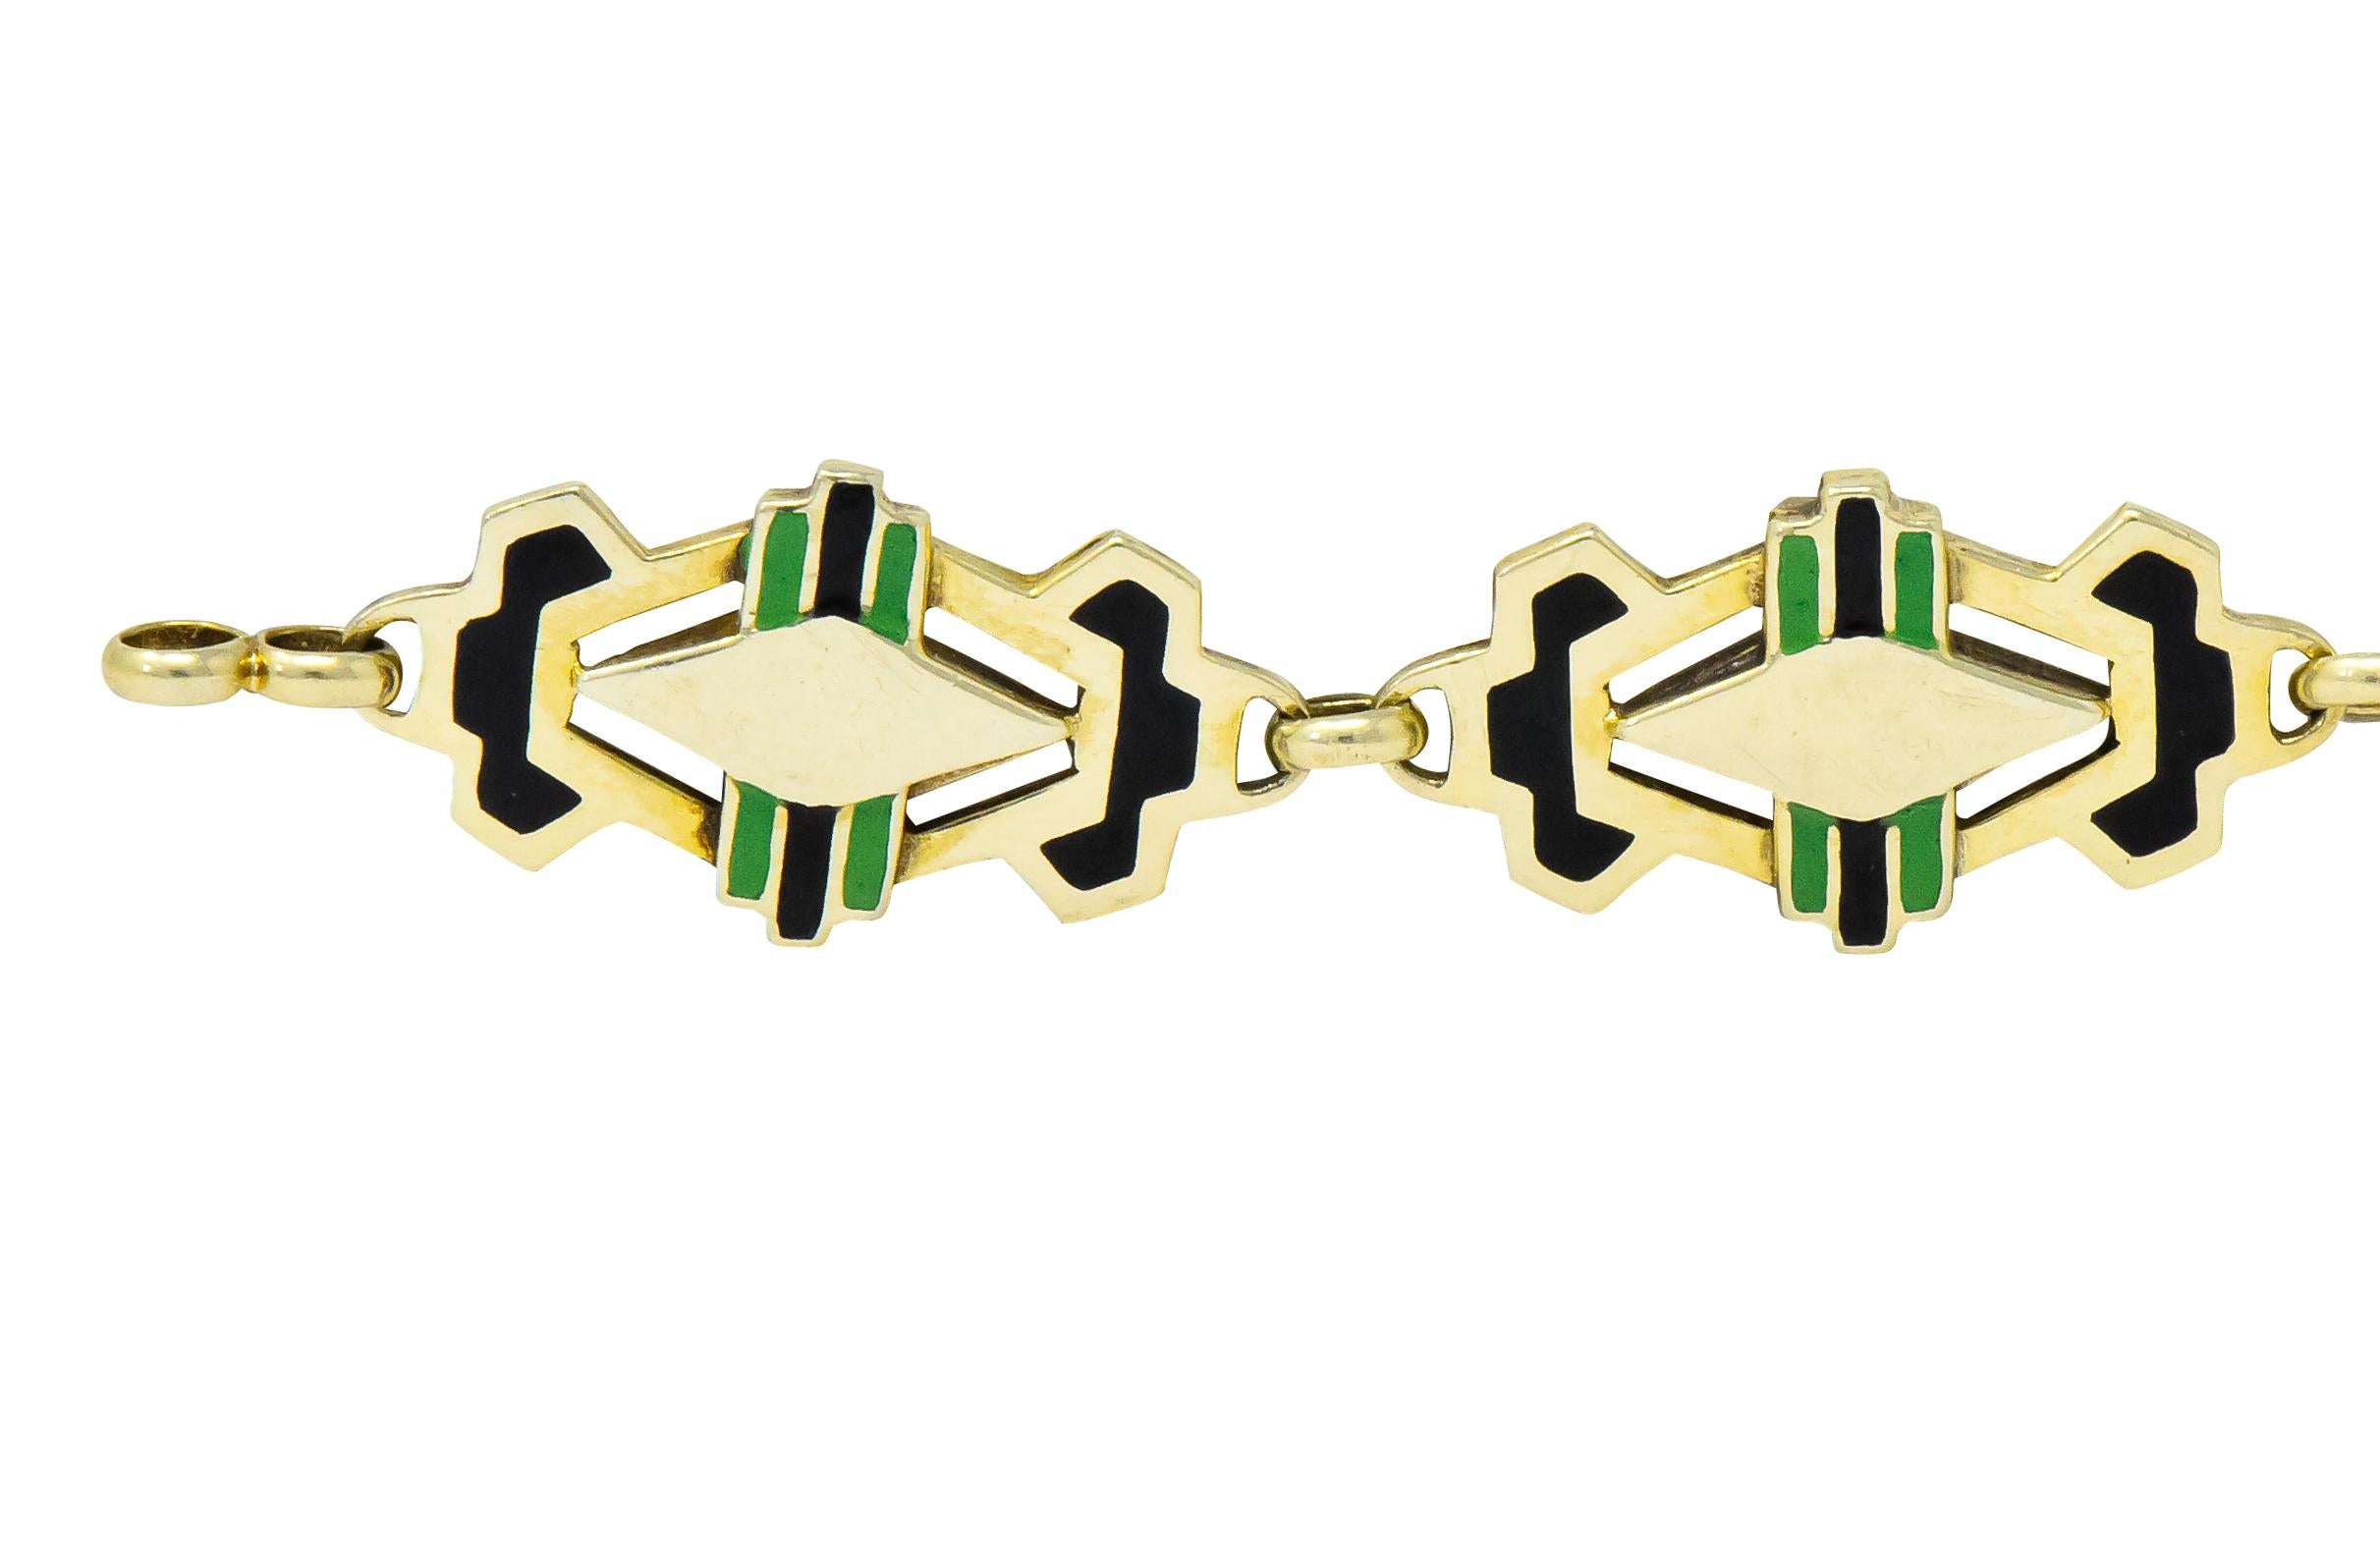 Link style bracelet with each link a stylized, pierced Deco design accented by black and green enamel

Alternating polished spacer links

Completed by spring ring clasp

Stamped 14k

Length: 7 1/4 inches

Width: approx. 3/8 (widest) inch

Total